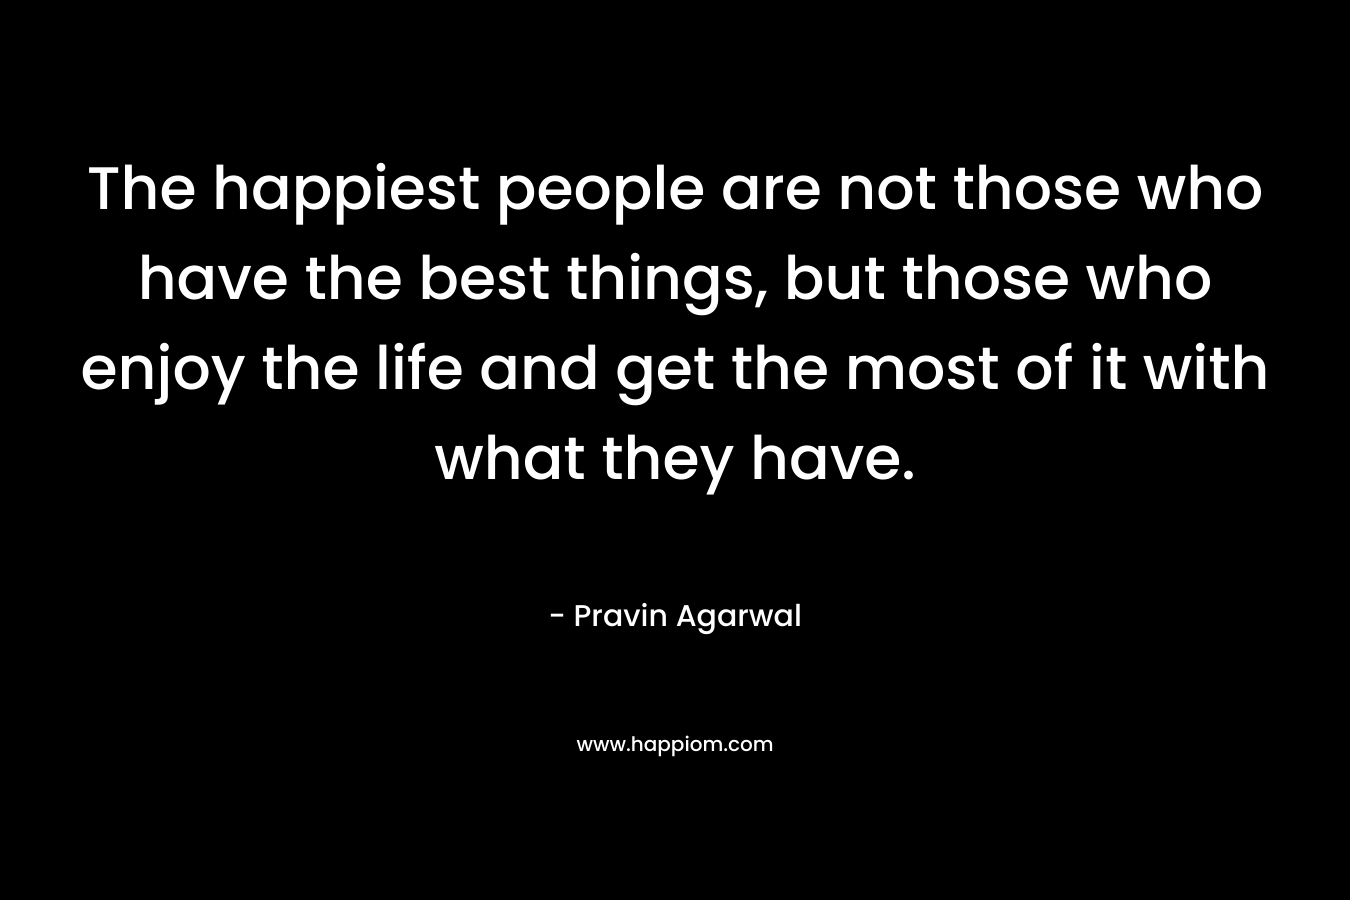 The happiest people are not those who have the best things, but those who enjoy the life and get the most of it with what they have. – Pravin Agarwal